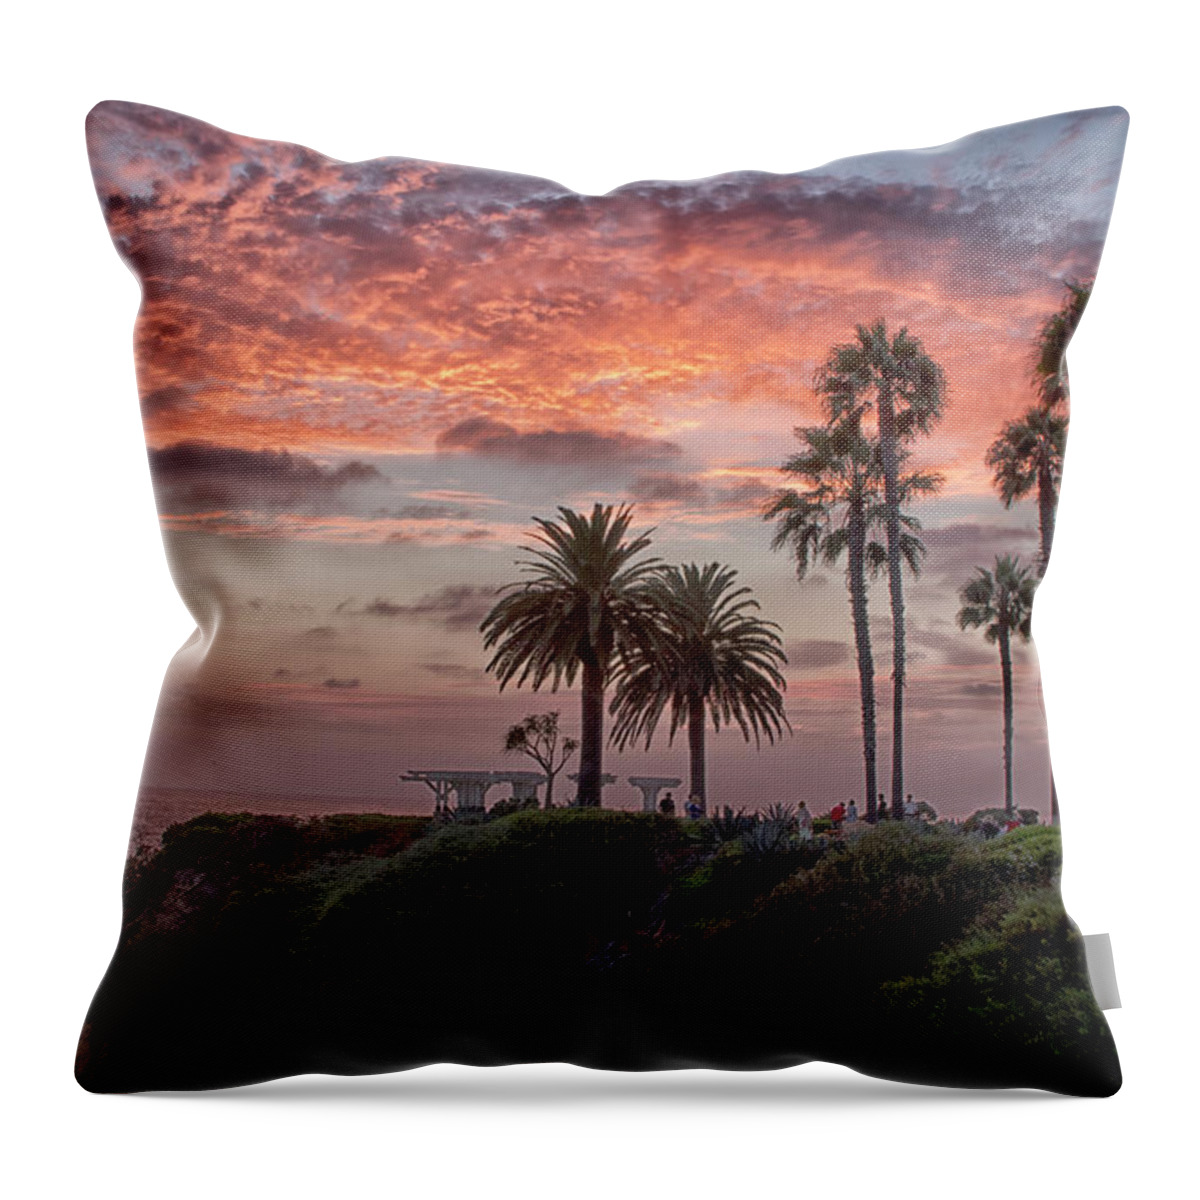 Treasure Island Throw Pillow featuring the photograph Treasure Island Sunset by Tom Kelly